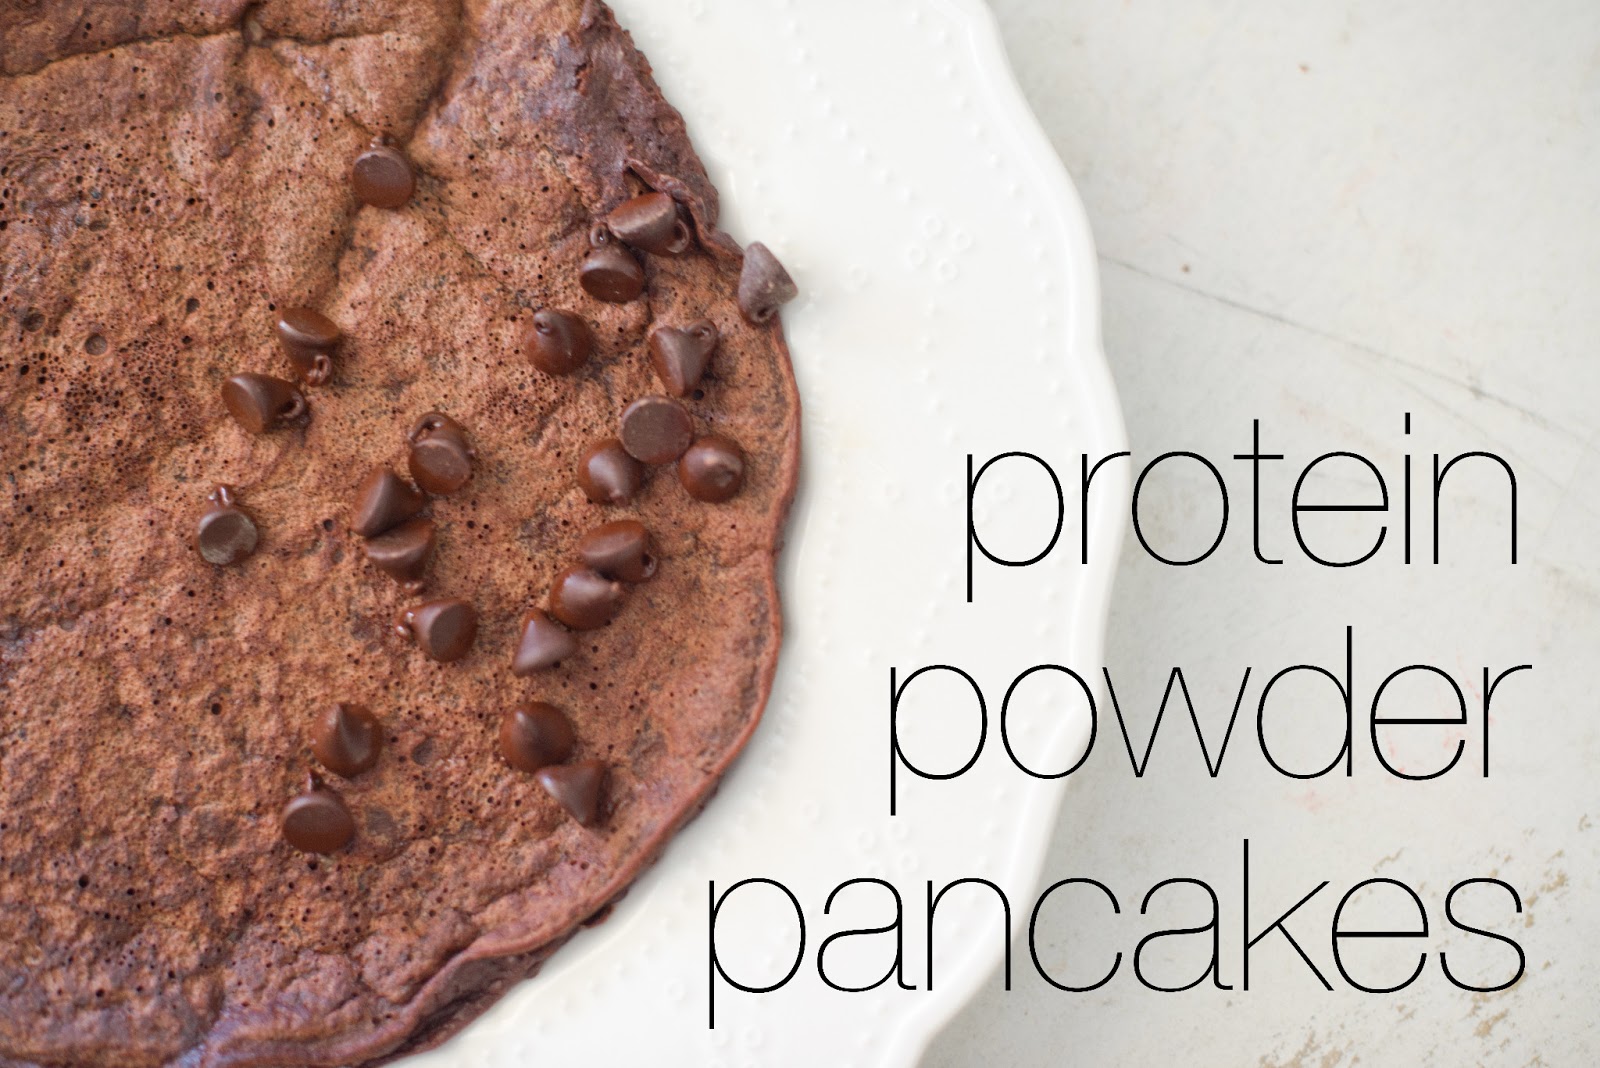 flour powder.  pancakes or protein No  still make from recipes protein made  how oil Pancake but powder using to